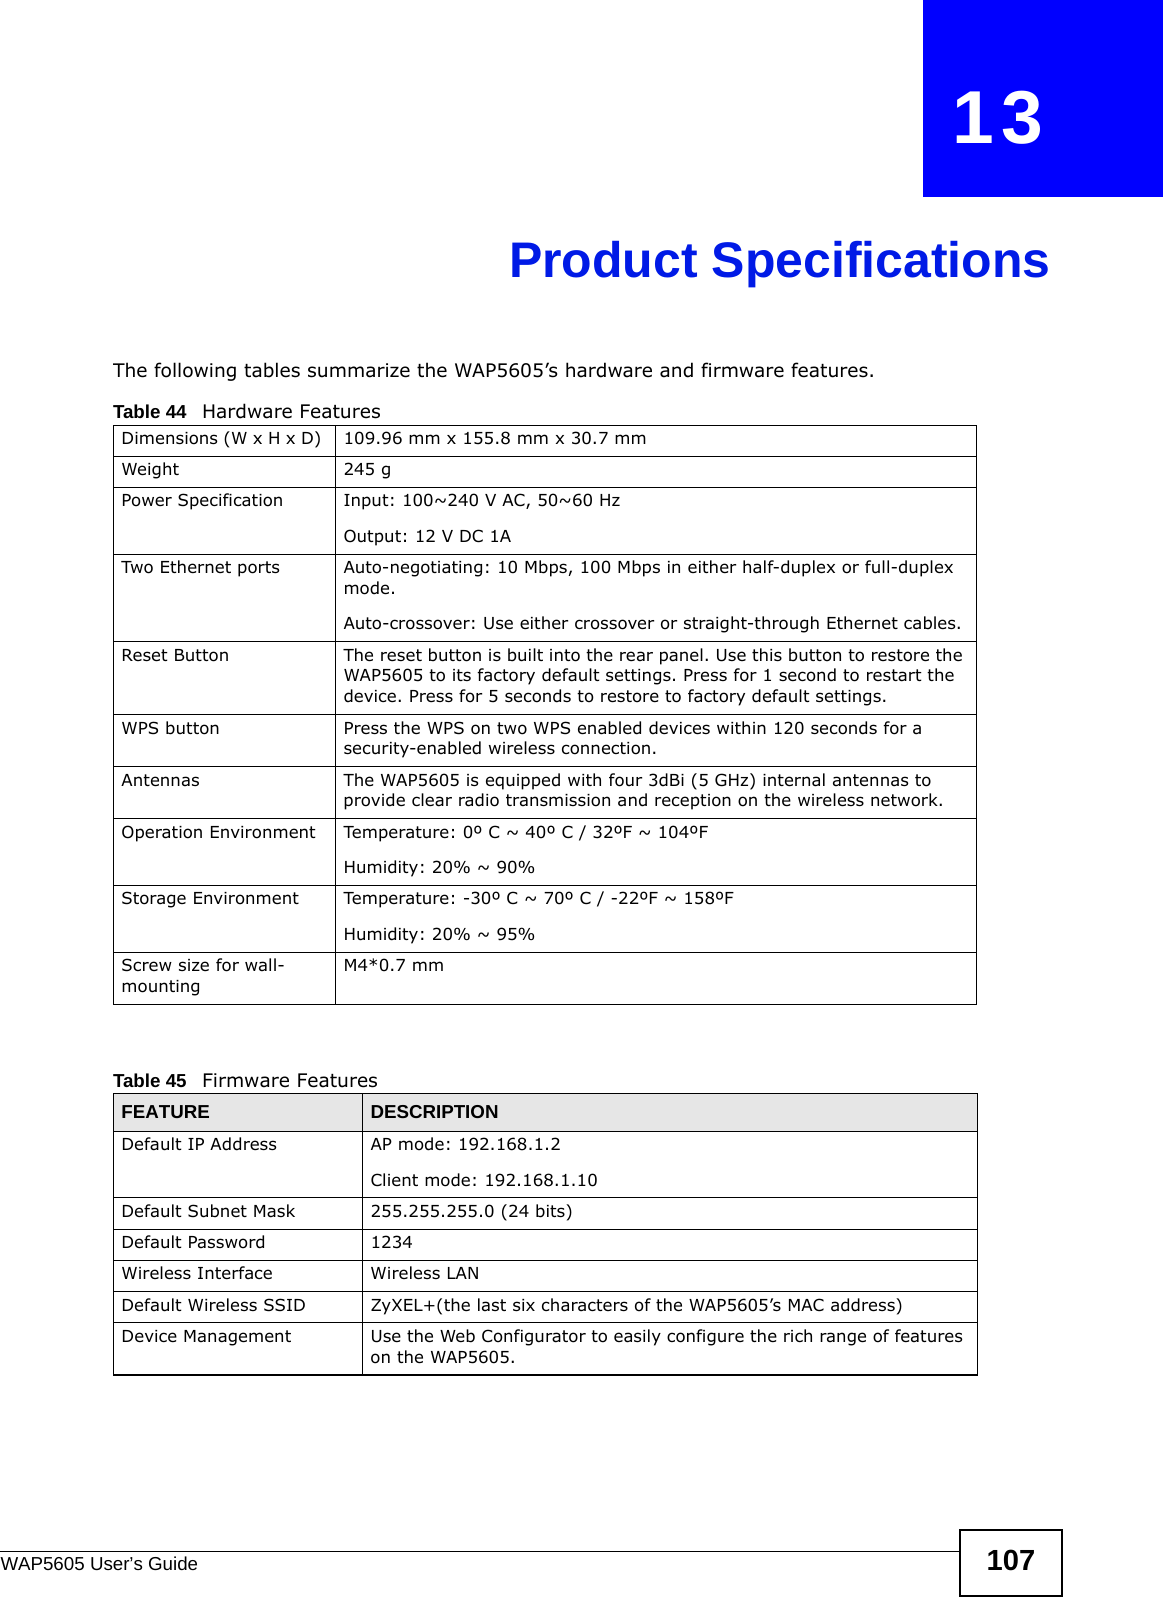 WAP5605 User’s Guide 107CHAPTER   13Product SpecificationsThe following tables summarize the WAP5605’s hardware and firmware features.Table 44   Hardware FeaturesDimensions (W x H x D)  109.96 mm x 155.8 mm x 30.7 mmWeight 245 gPower Specification Input: 100~240 V AC, 50~60 HzOutput: 12 V DC 1ATwo Ethernet ports Auto-negotiating: 10 Mbps, 100 Mbps in either half-duplex or full-duplex mode.Auto-crossover: Use either crossover or straight-through Ethernet cables.Reset Button The reset button is built into the rear panel. Use this button to restore the WAP5605 to its factory default settings. Press for 1 second to restart the device. Press for 5 seconds to restore to factory default settings.WPS button Press the WPS on two WPS enabled devices within 120 seconds for a security-enabled wireless connection.Antennas The WAP5605 is equipped with four 3dBi (5 GHz) internal antennas to provide clear radio transmission and reception on the wireless network. Operation Environment Temperature: 0º C ~ 40º C / 32ºF ~ 104ºFHumidity: 20% ~ 90% Storage Environment Temperature: -30º C ~ 70º C / -22ºF ~ 158ºFHumidity: 20% ~ 95% Screw size for wall-mountingM4*0.7 mm Table 45   Firmware FeaturesFEATURE DESCRIPTIONDefault IP Address AP mode: 192.168.1.2Client mode: 192.168.1.10Default Subnet Mask 255.255.255.0 (24 bits)Default Password 1234Wireless Interface Wireless LANDefault Wireless SSID ZyXEL+(the last six characters of the WAP5605’s MAC address)Device Management Use the Web Configurator to easily configure the rich range of features on the WAP5605.